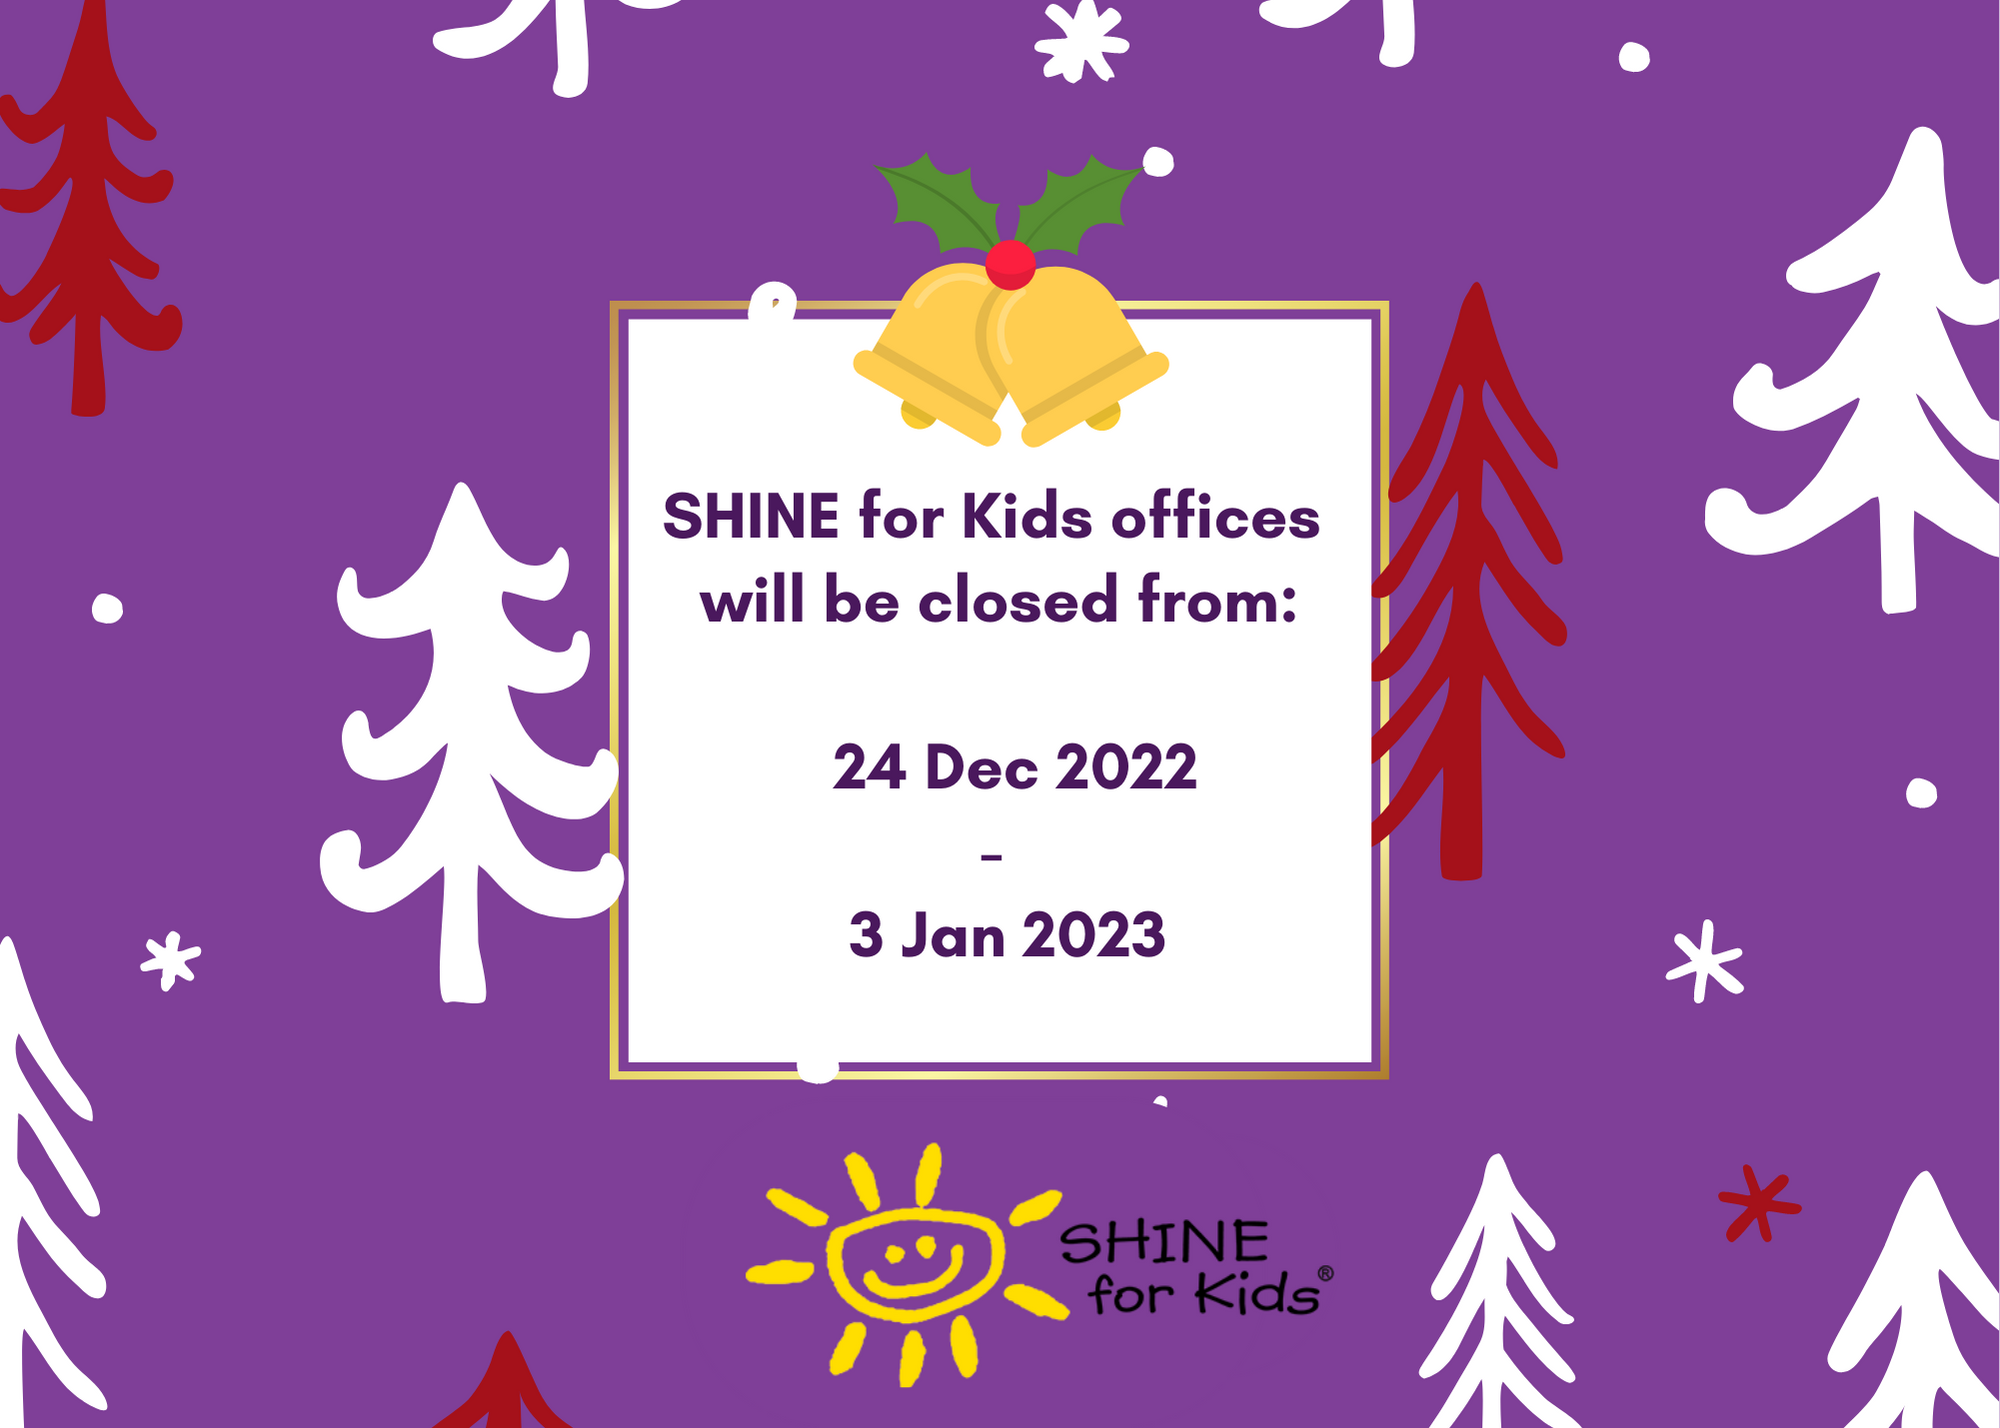 SHINE for Kids offices closed over Christmas 24th Dec – 3rd Jan